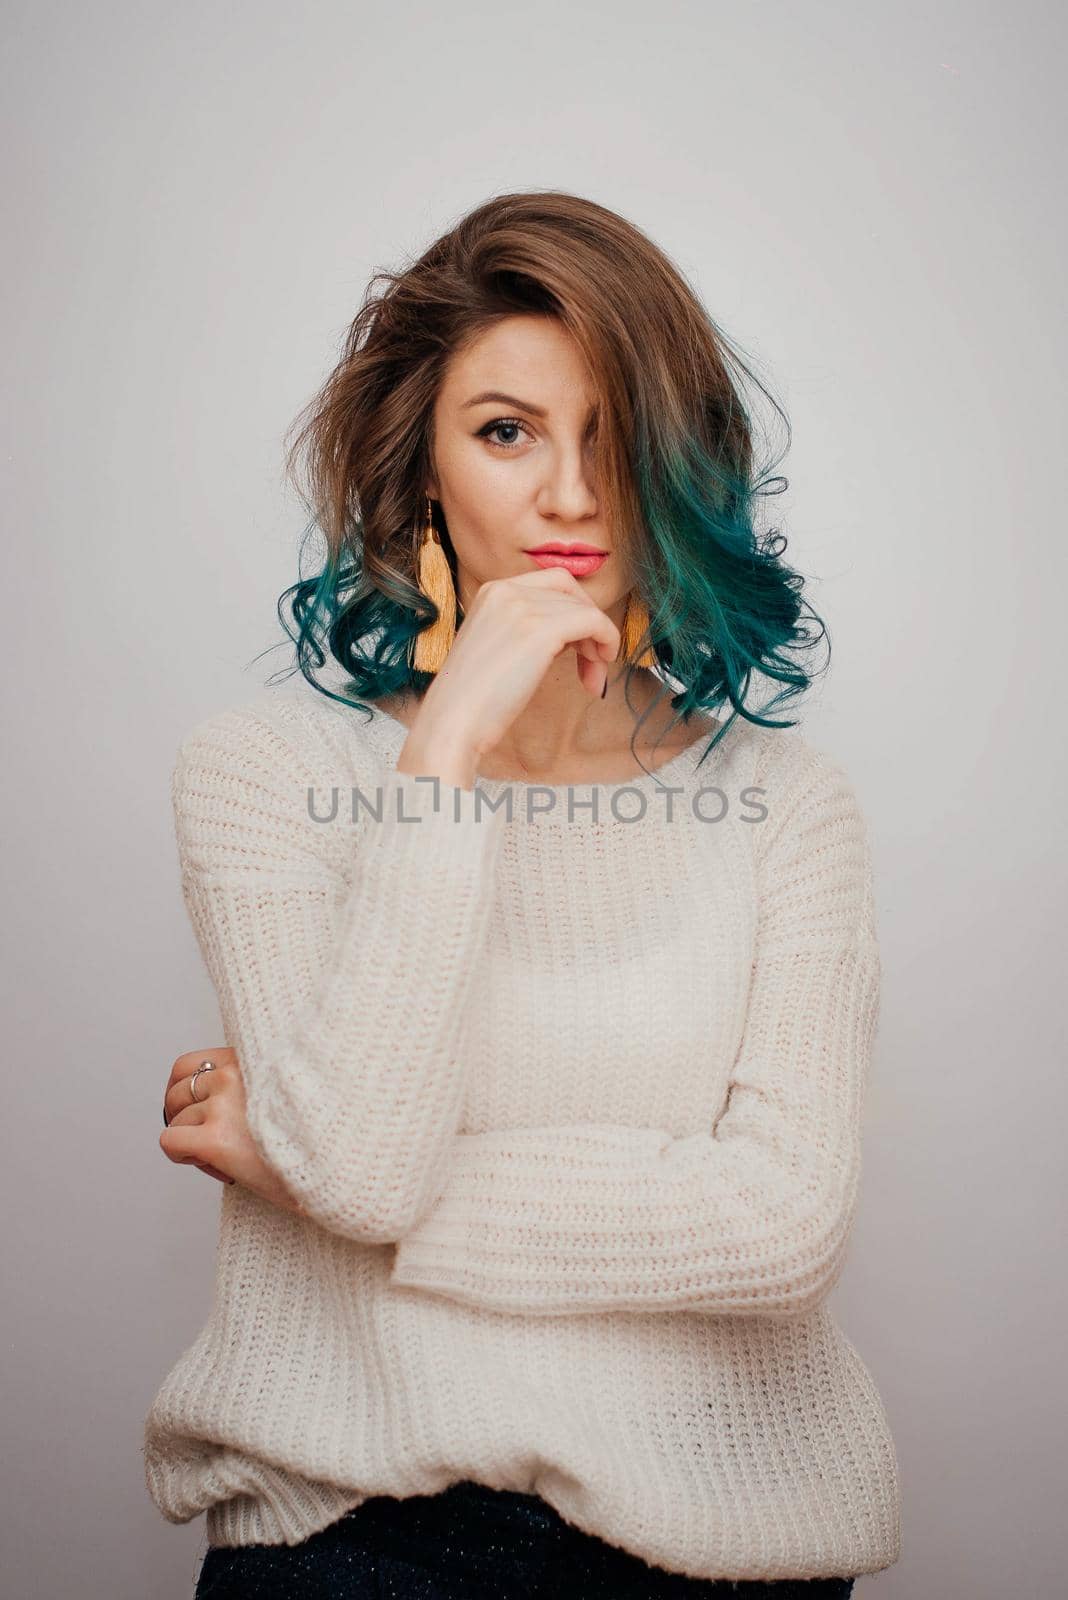 Pretty woman portrait with colored hair on a white background. Long yellow earrings in contrast with turquoise hair.